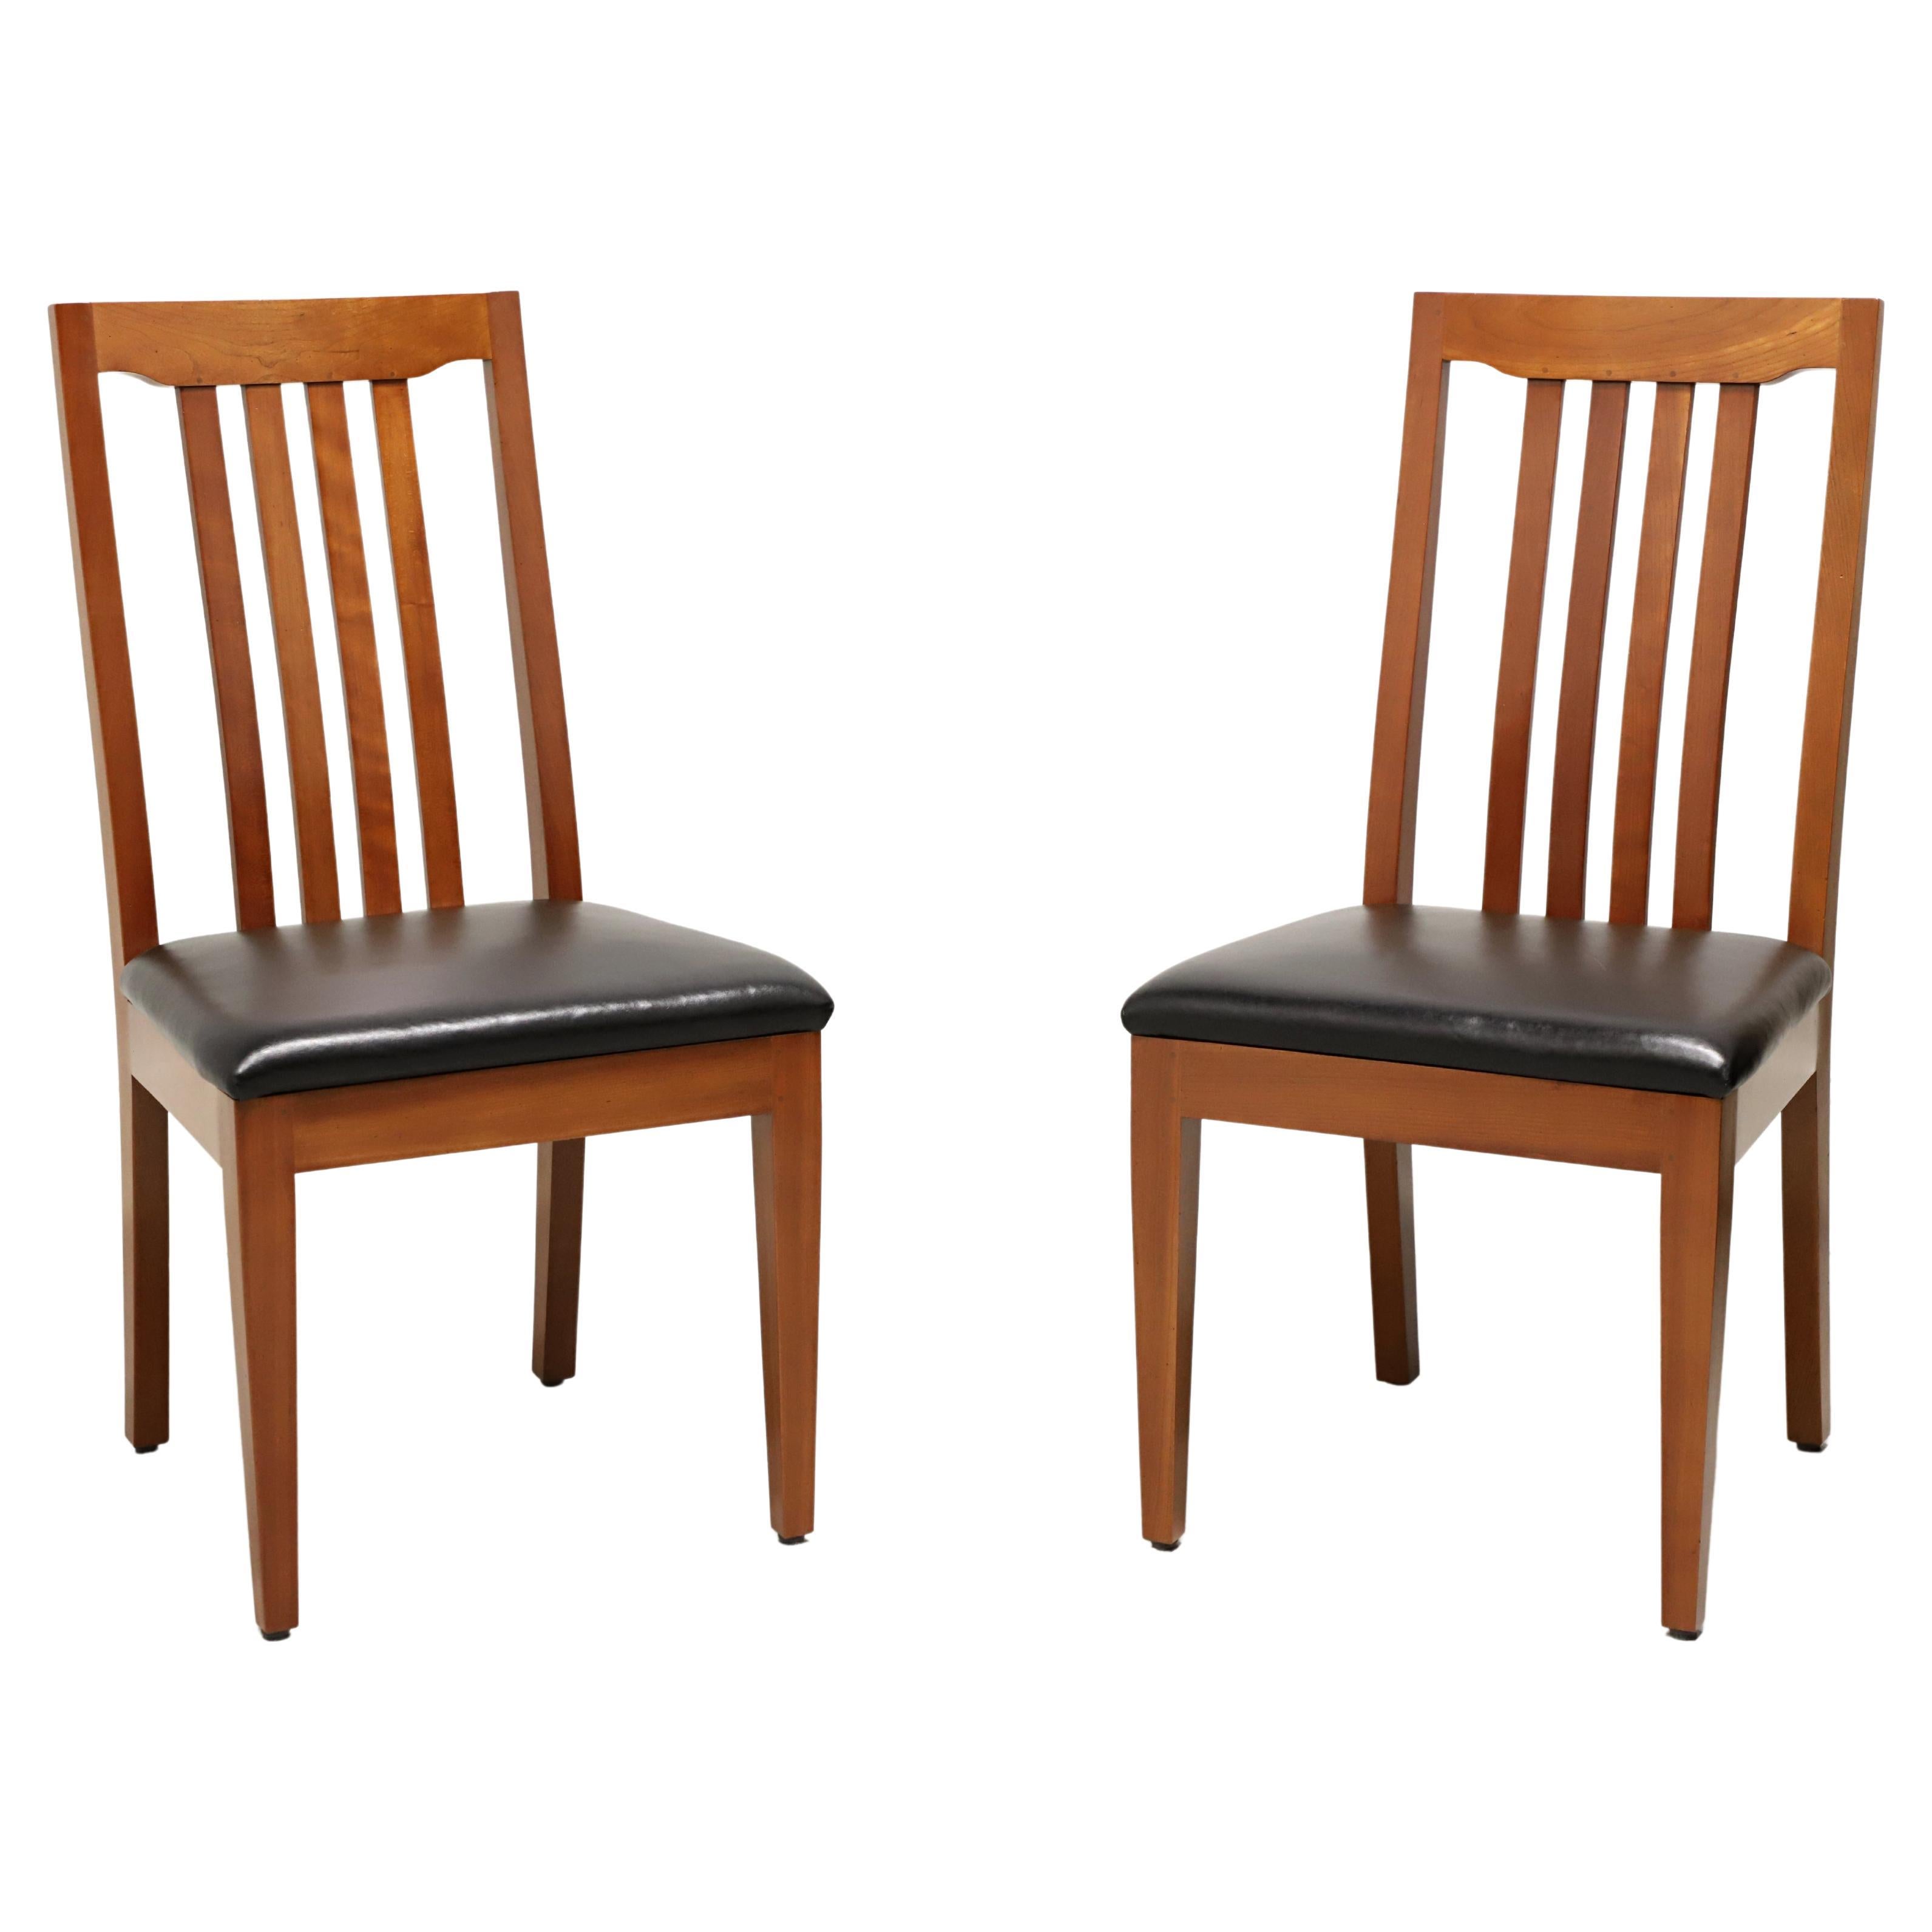 ROBERT BERGELIN Custom Solid Cherry Mission Dining Side Chairs - Pair C For Sale